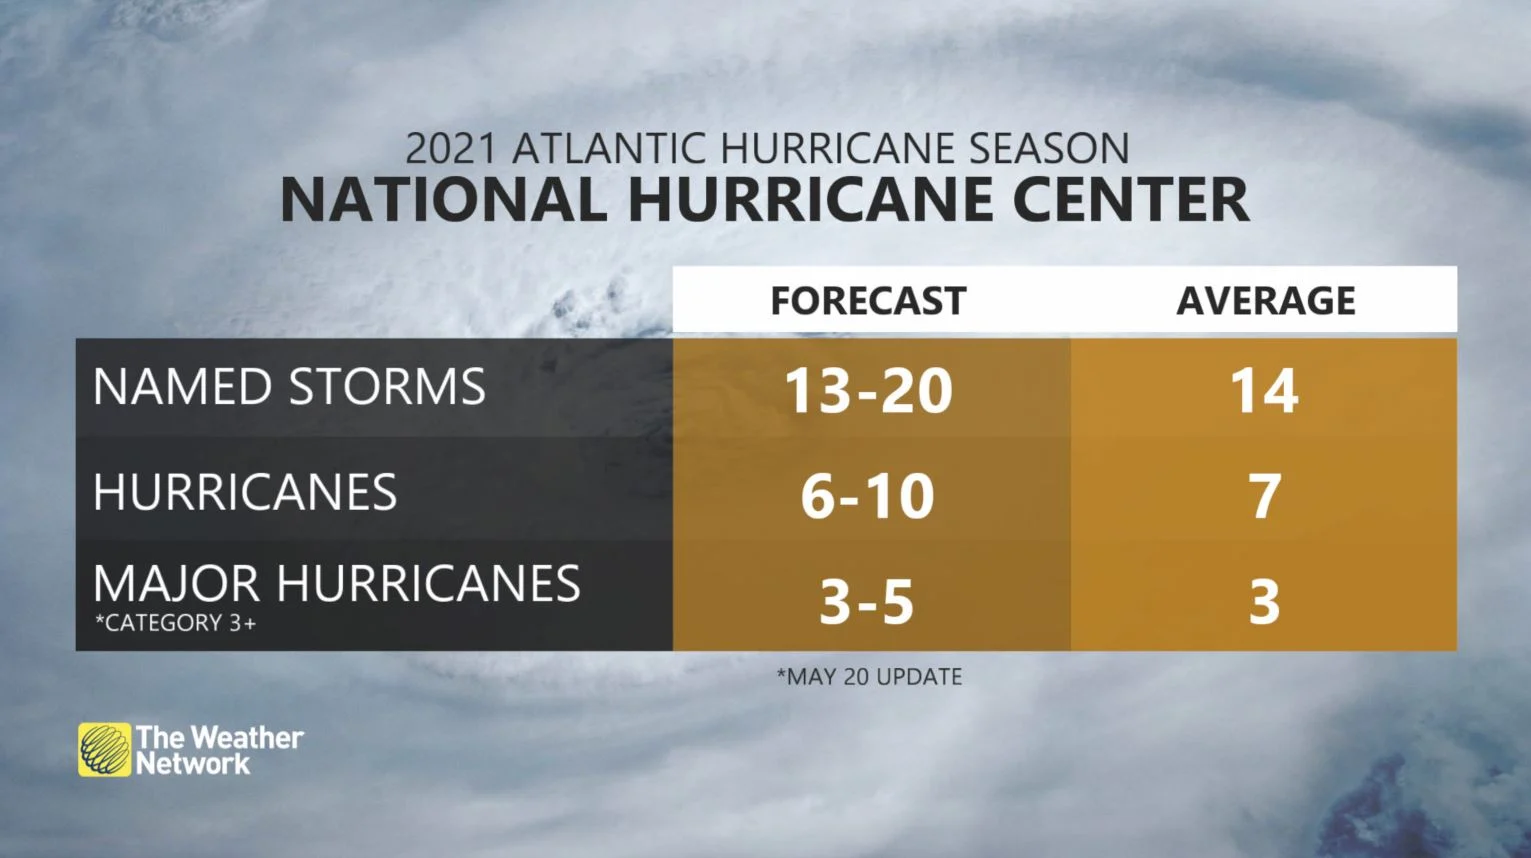 National Hurricane Center Storm Predictions for 2021